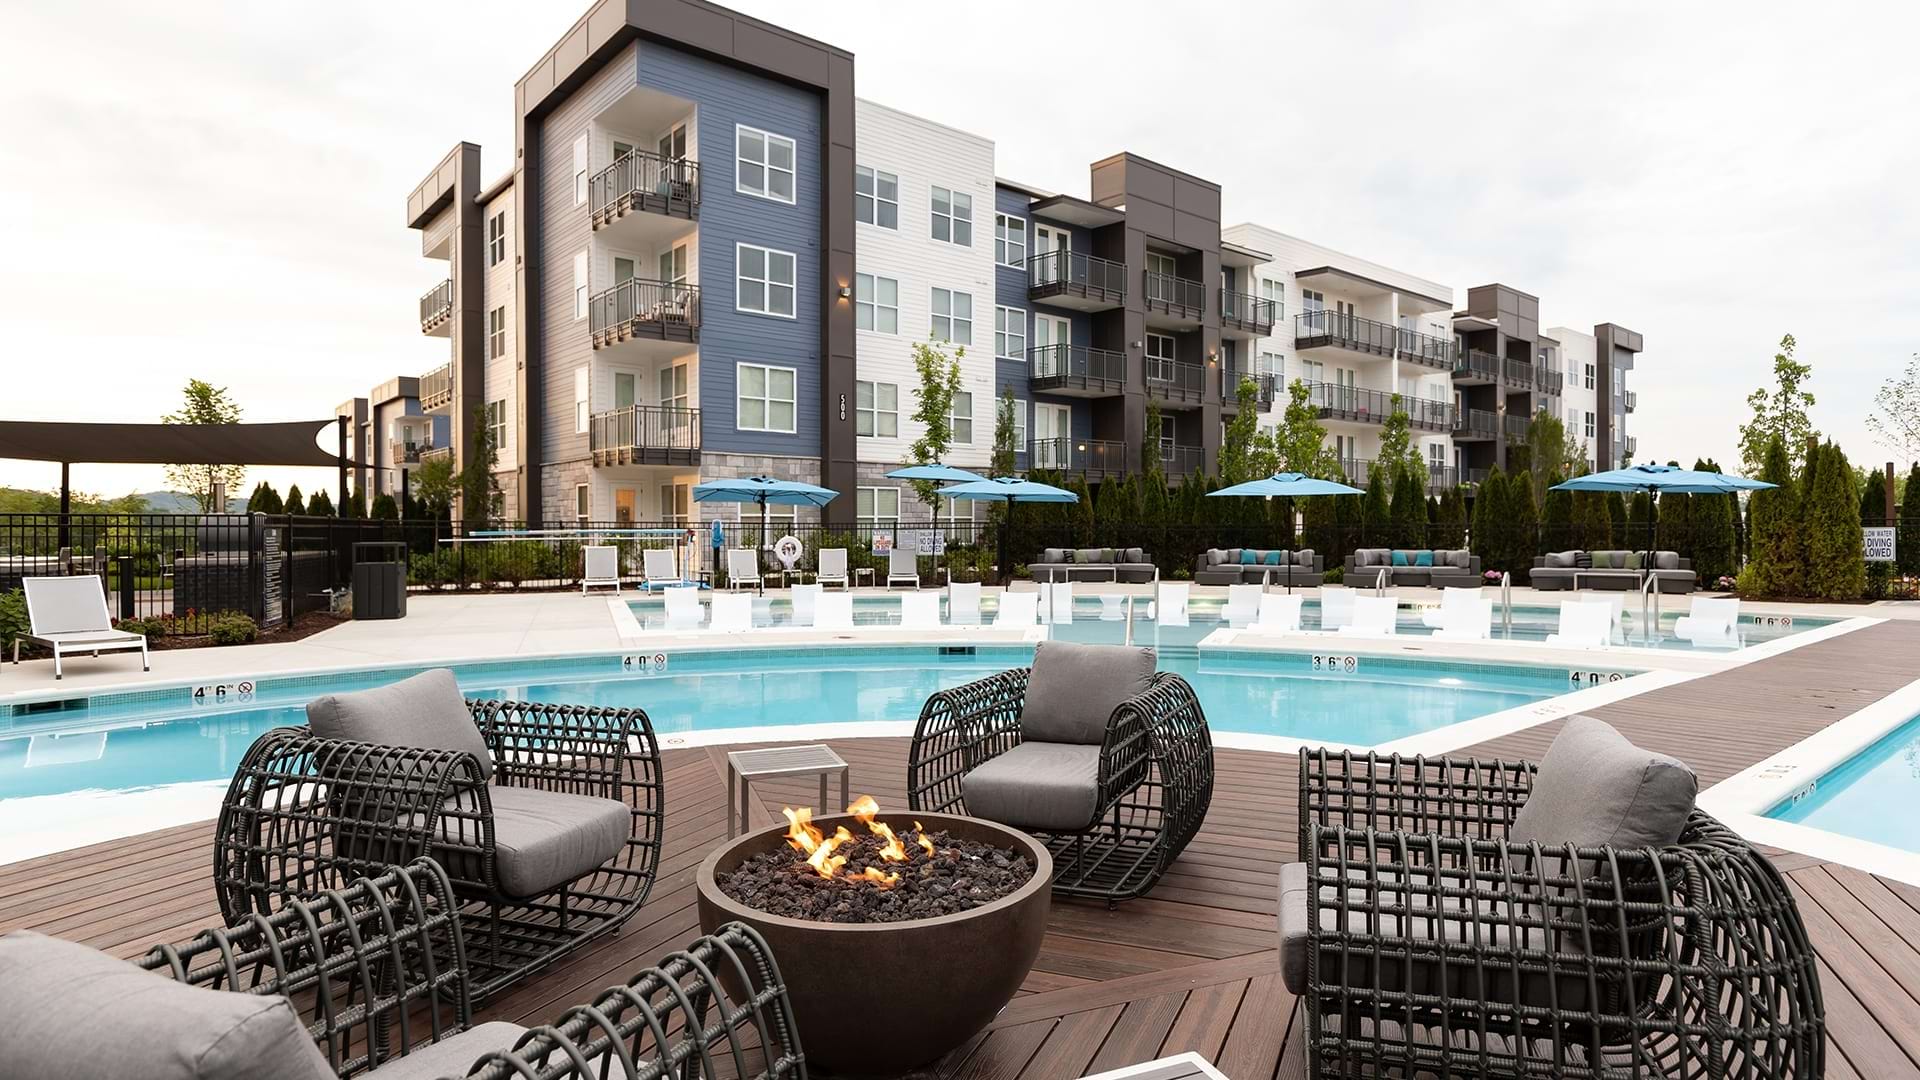 Poolside Fire Pit at Our West Nashville Apartments for Rent